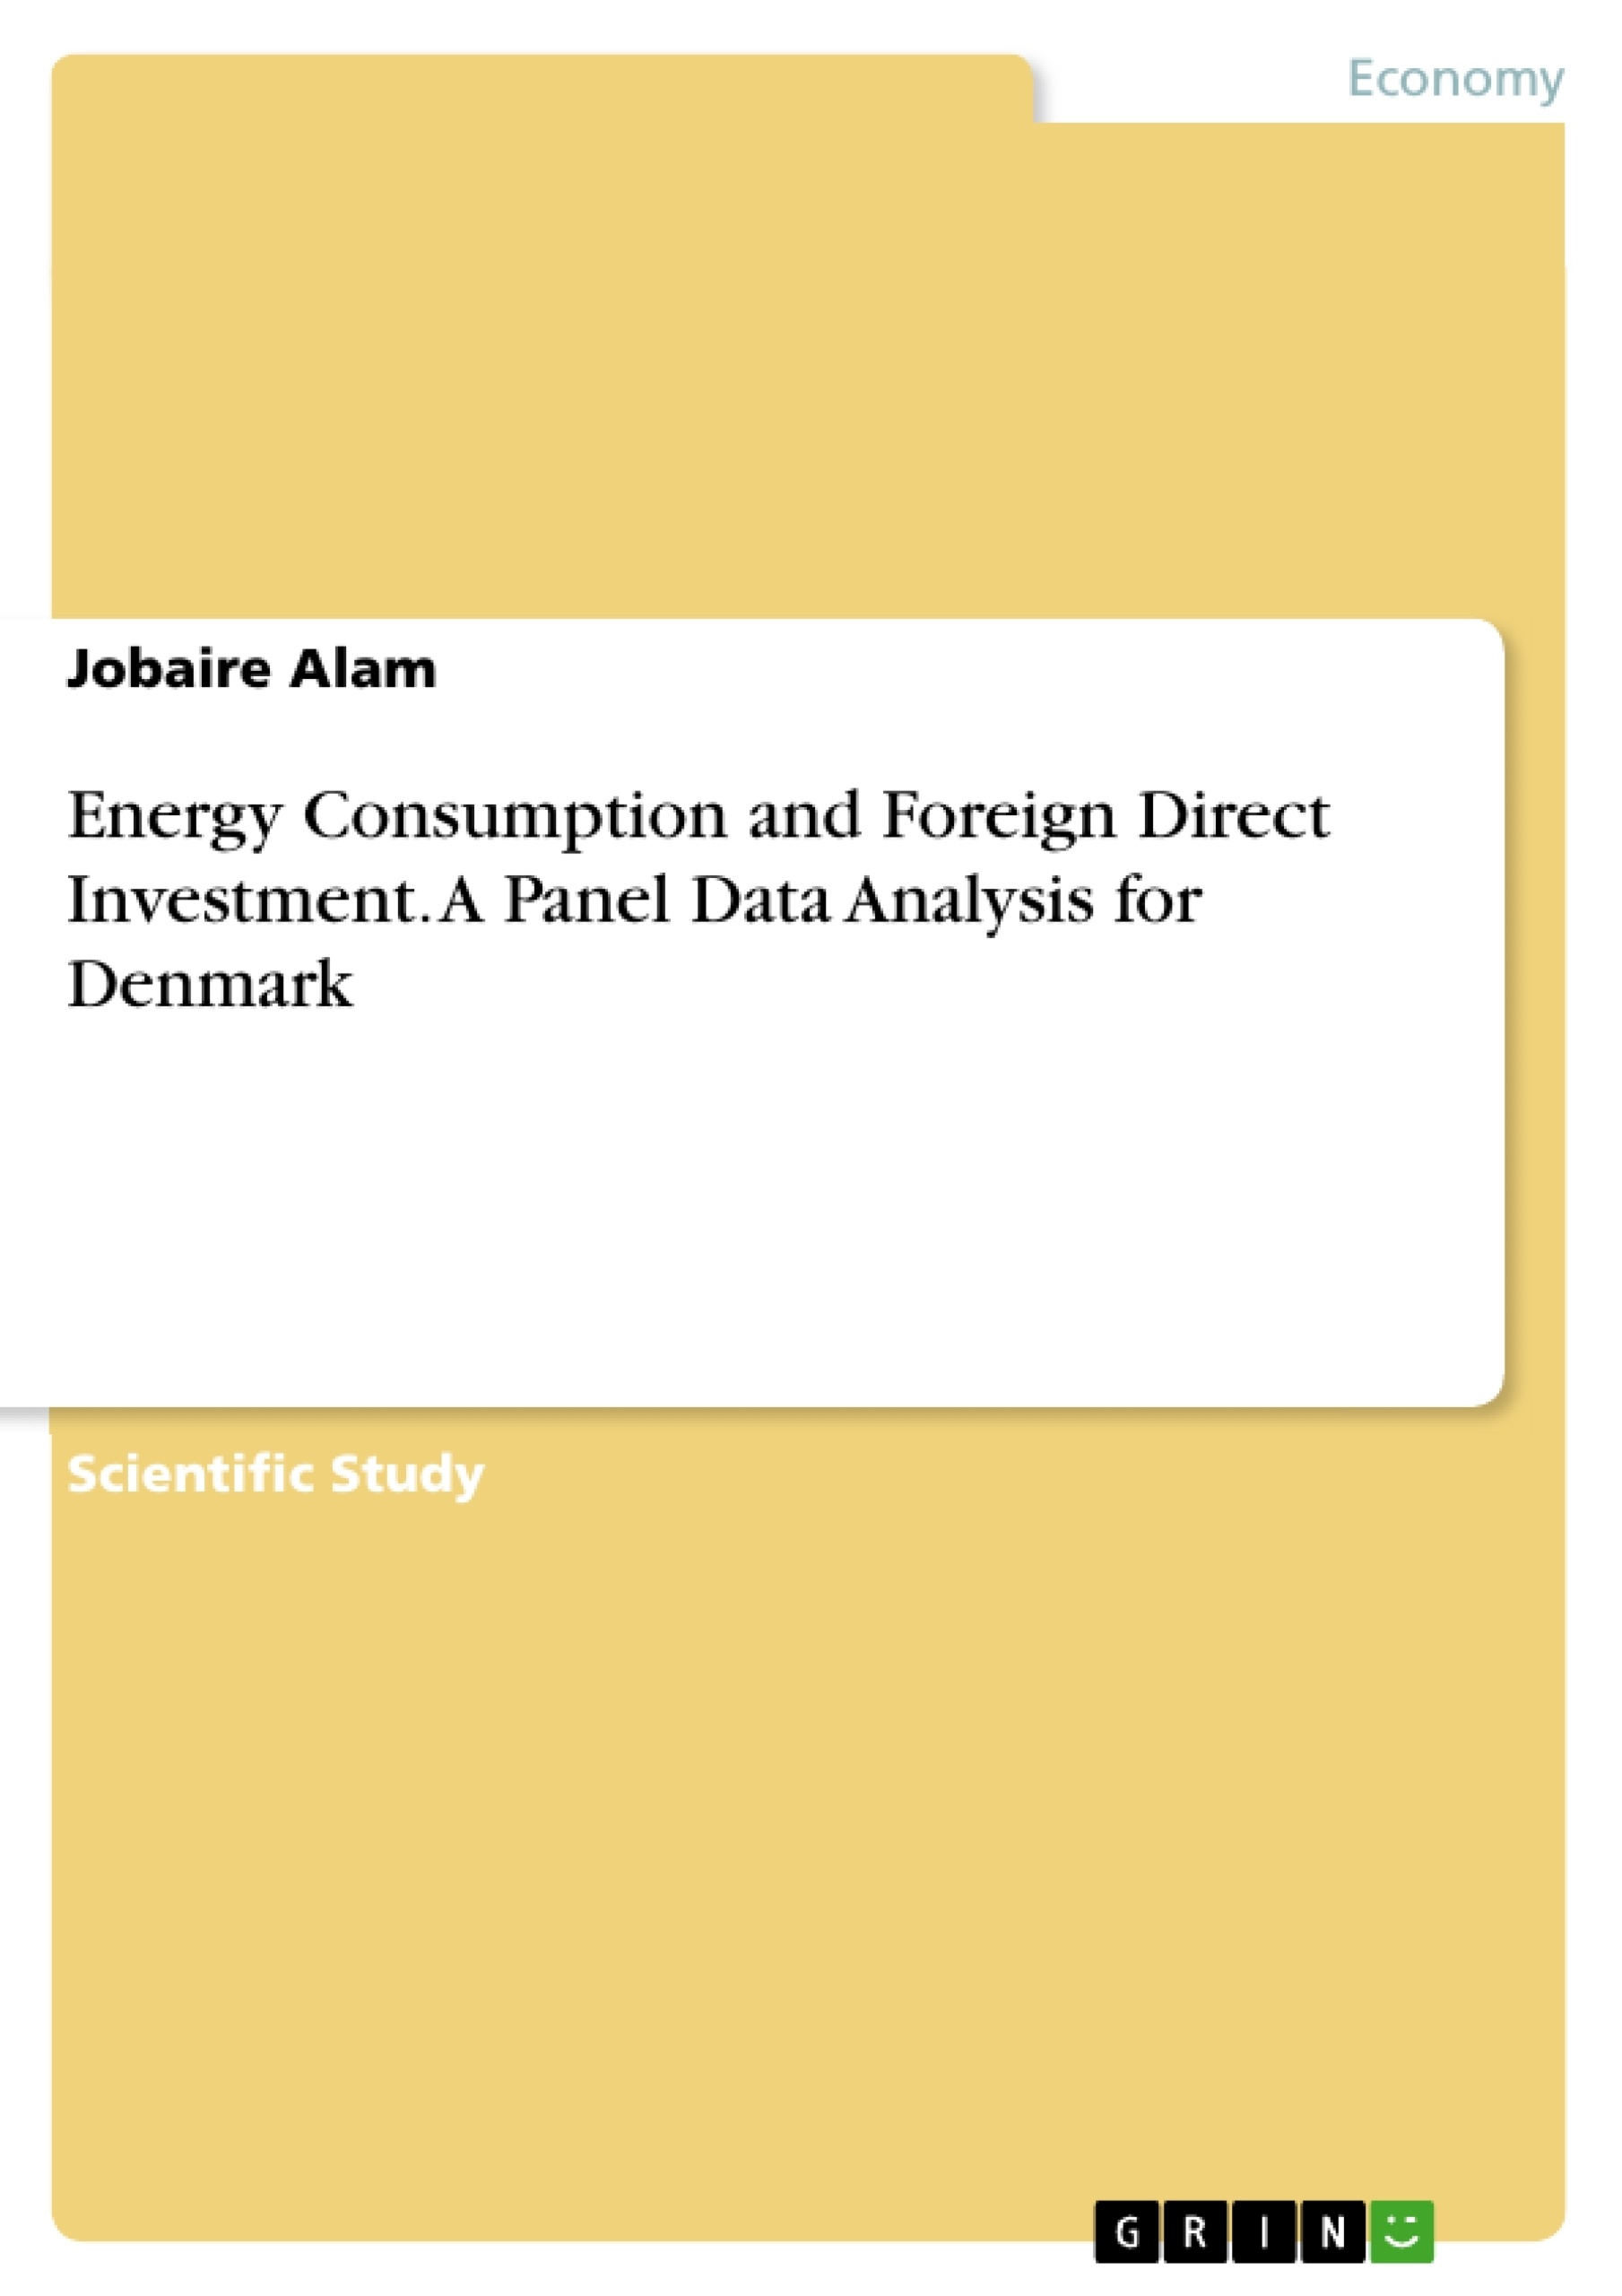 Título: Energy Consumption and Foreign Direct Investment. A Panel Data Analysis for Denmark